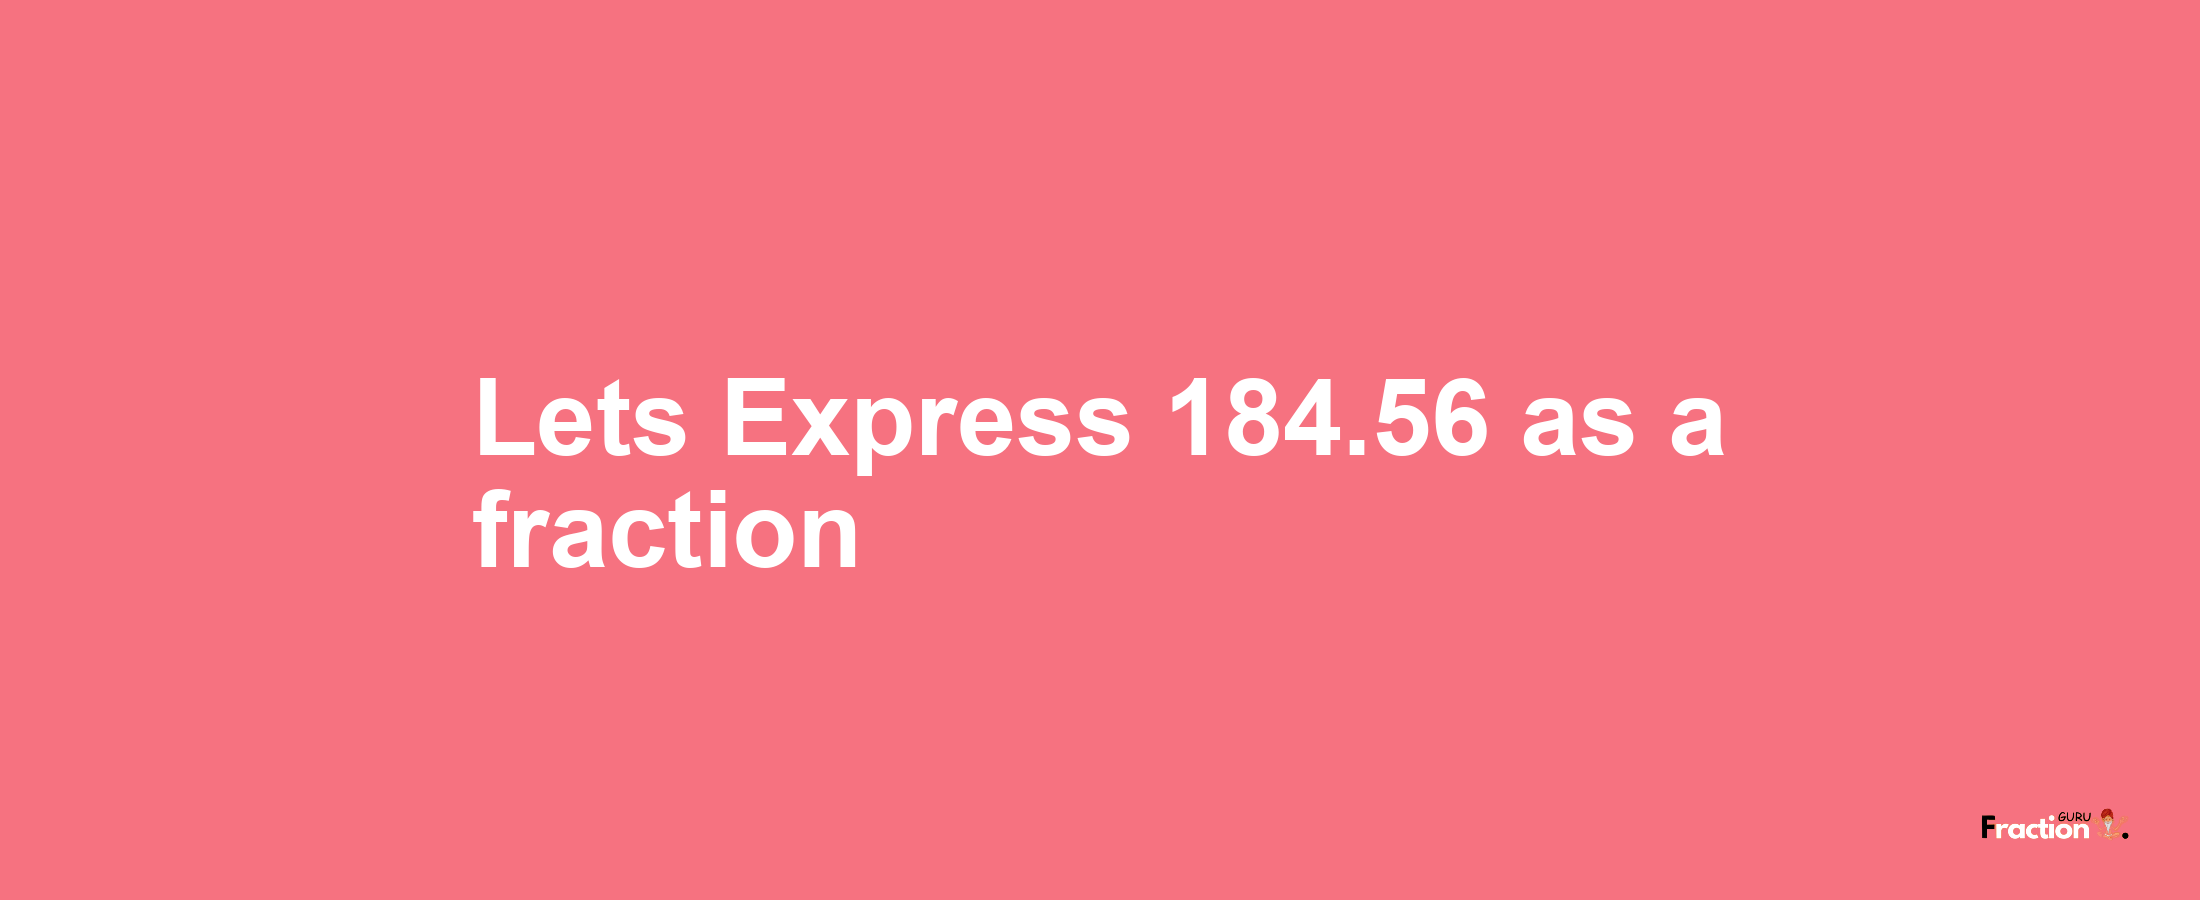 Lets Express 184.56 as afraction